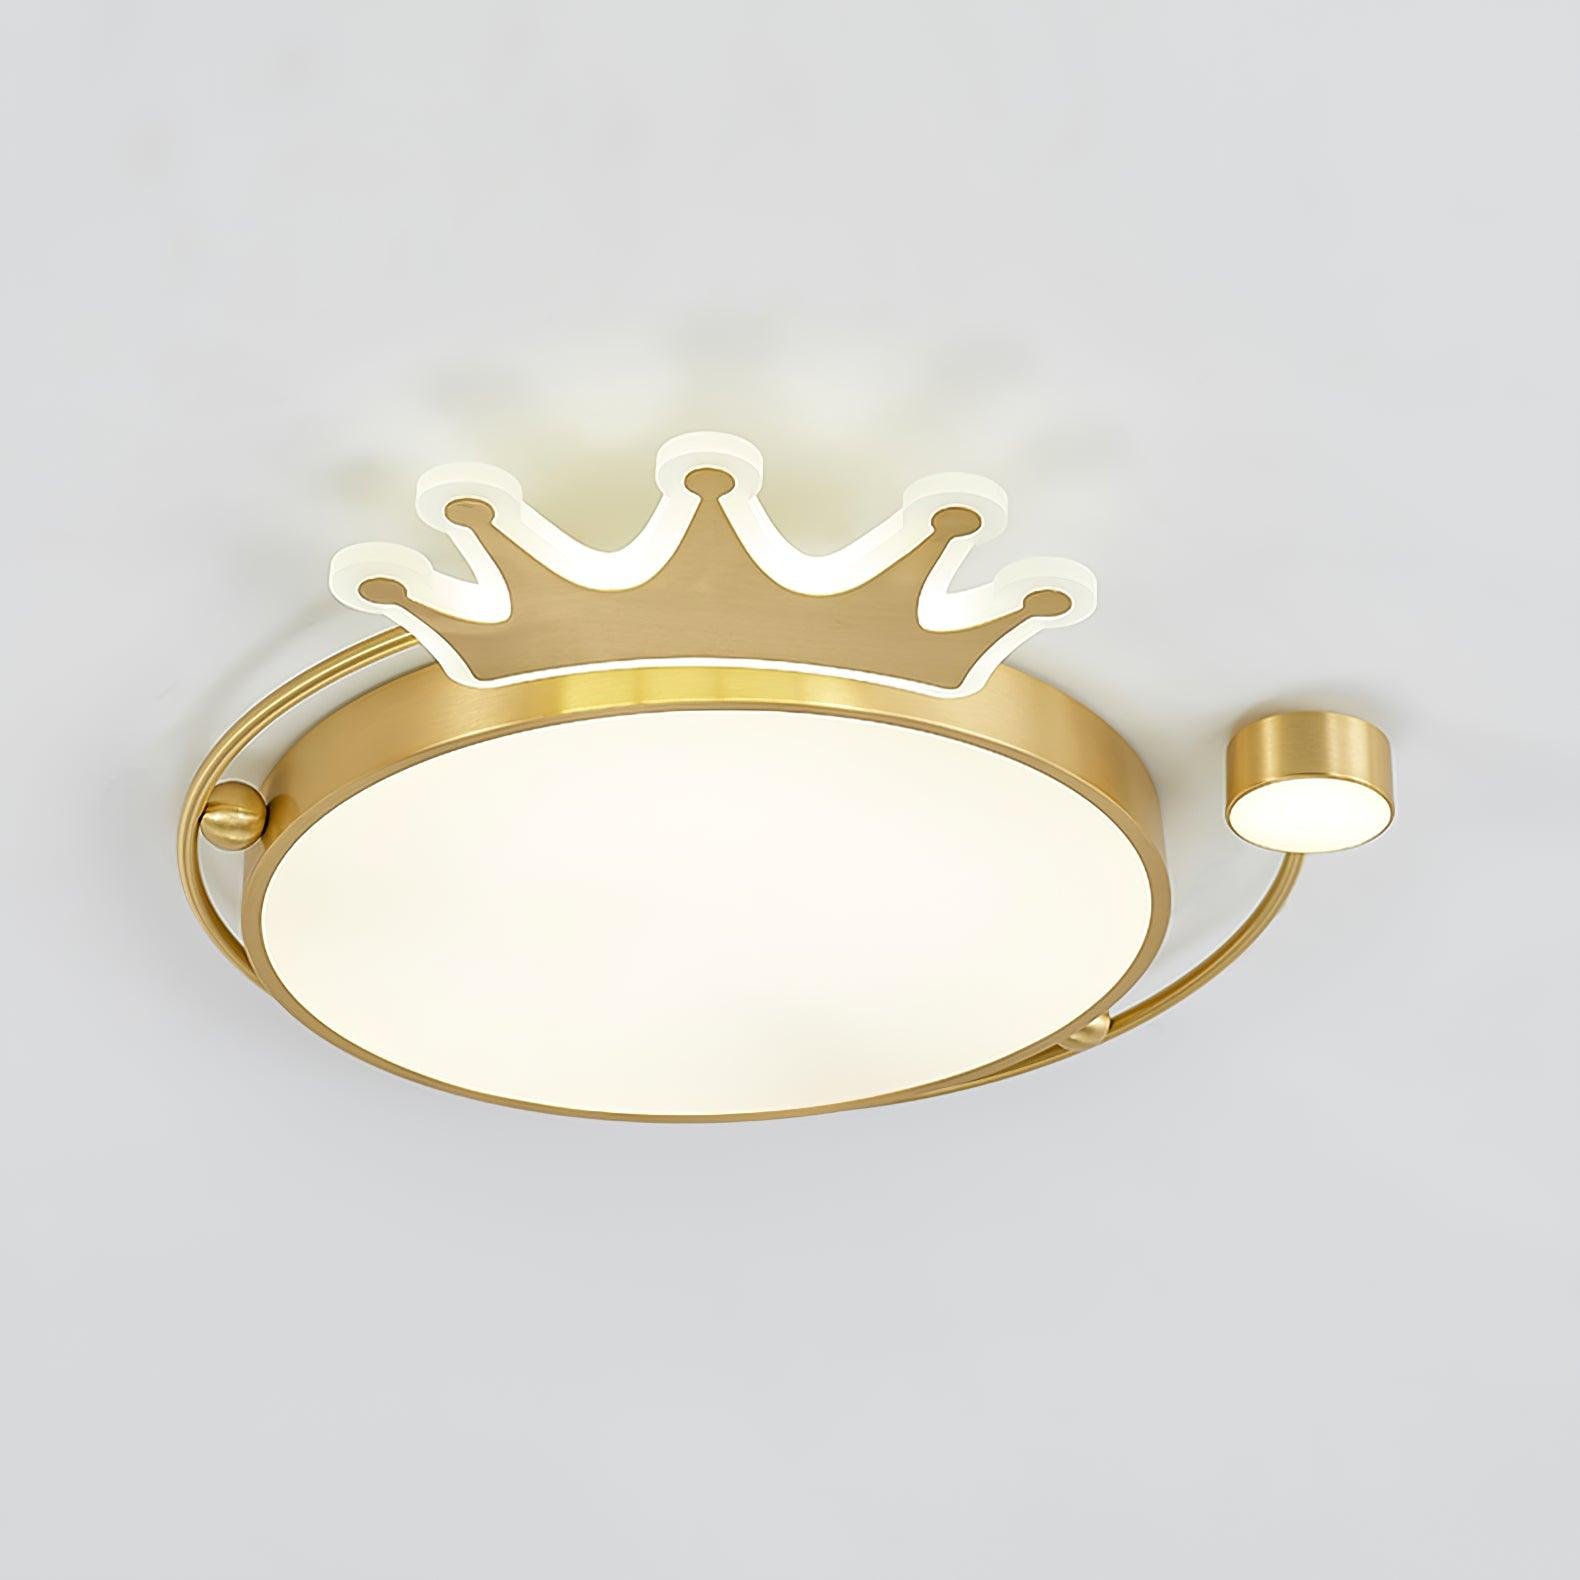 Brass Crown Ceiling Light with Cool Light, Diameter 18.9 inches x Height 1.6 inches (48cm x 4cm)